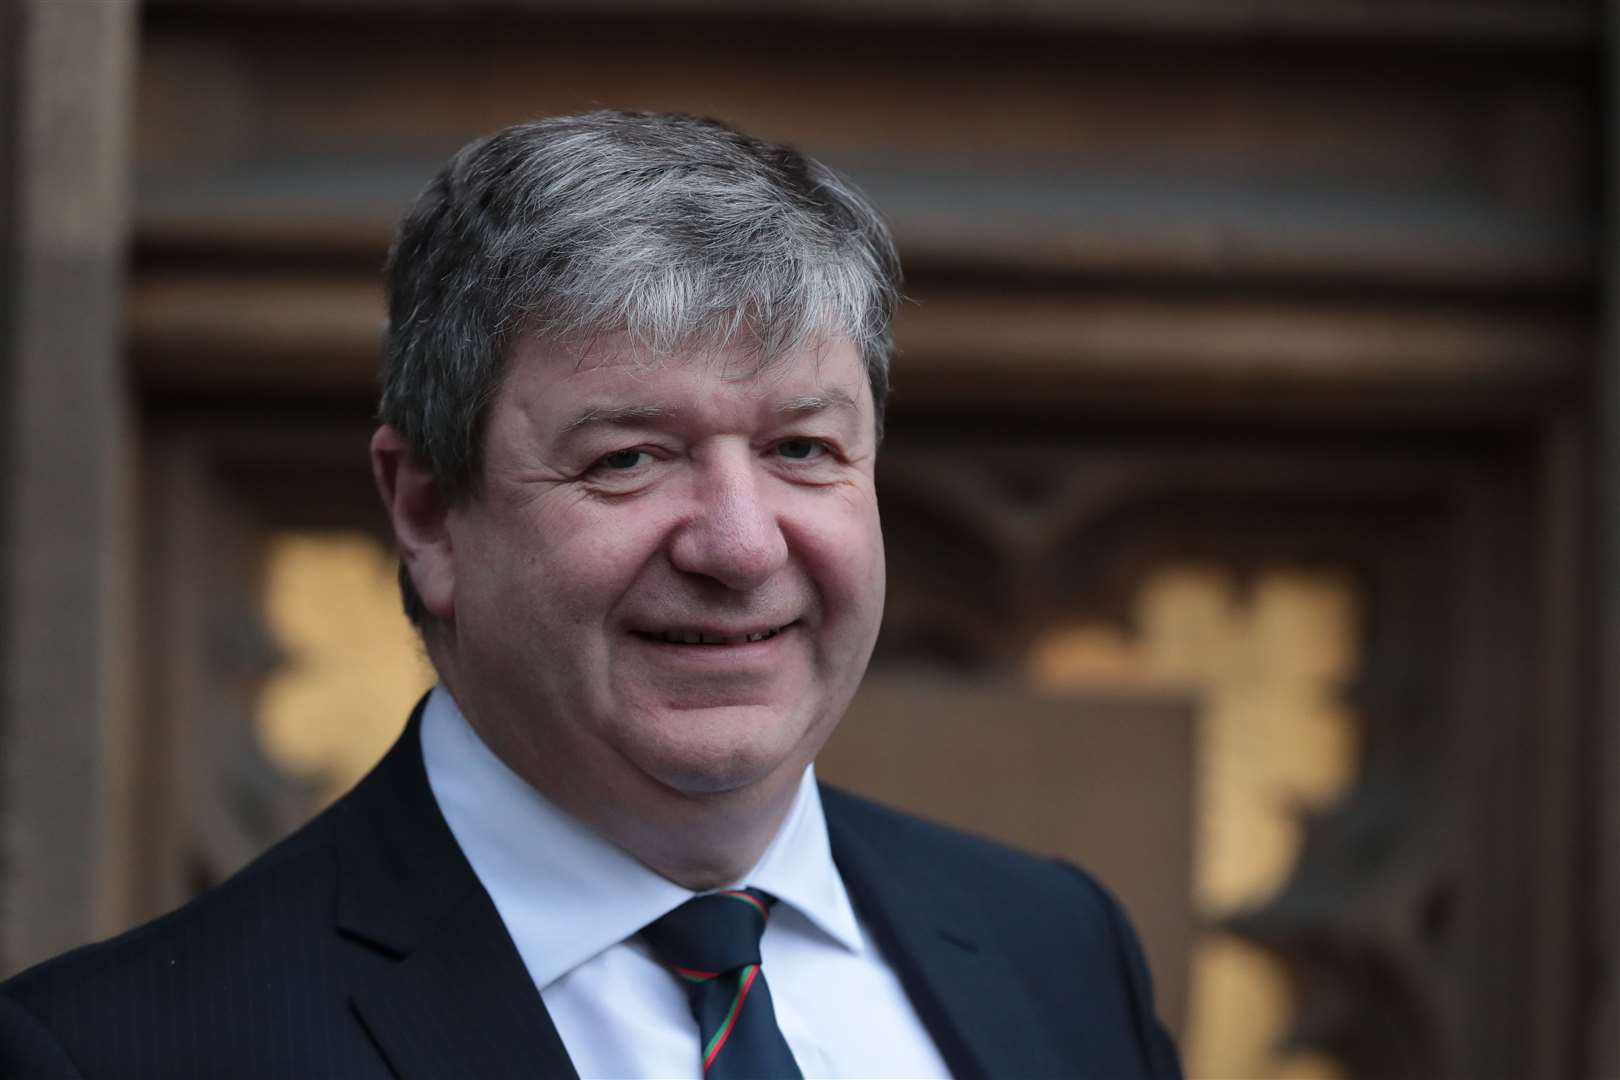 Liberal Democrat MP Alistair Carmichael stressed the need to ‘shift the debate’ on the issue of oil and gas (Aaron Chown/PA)